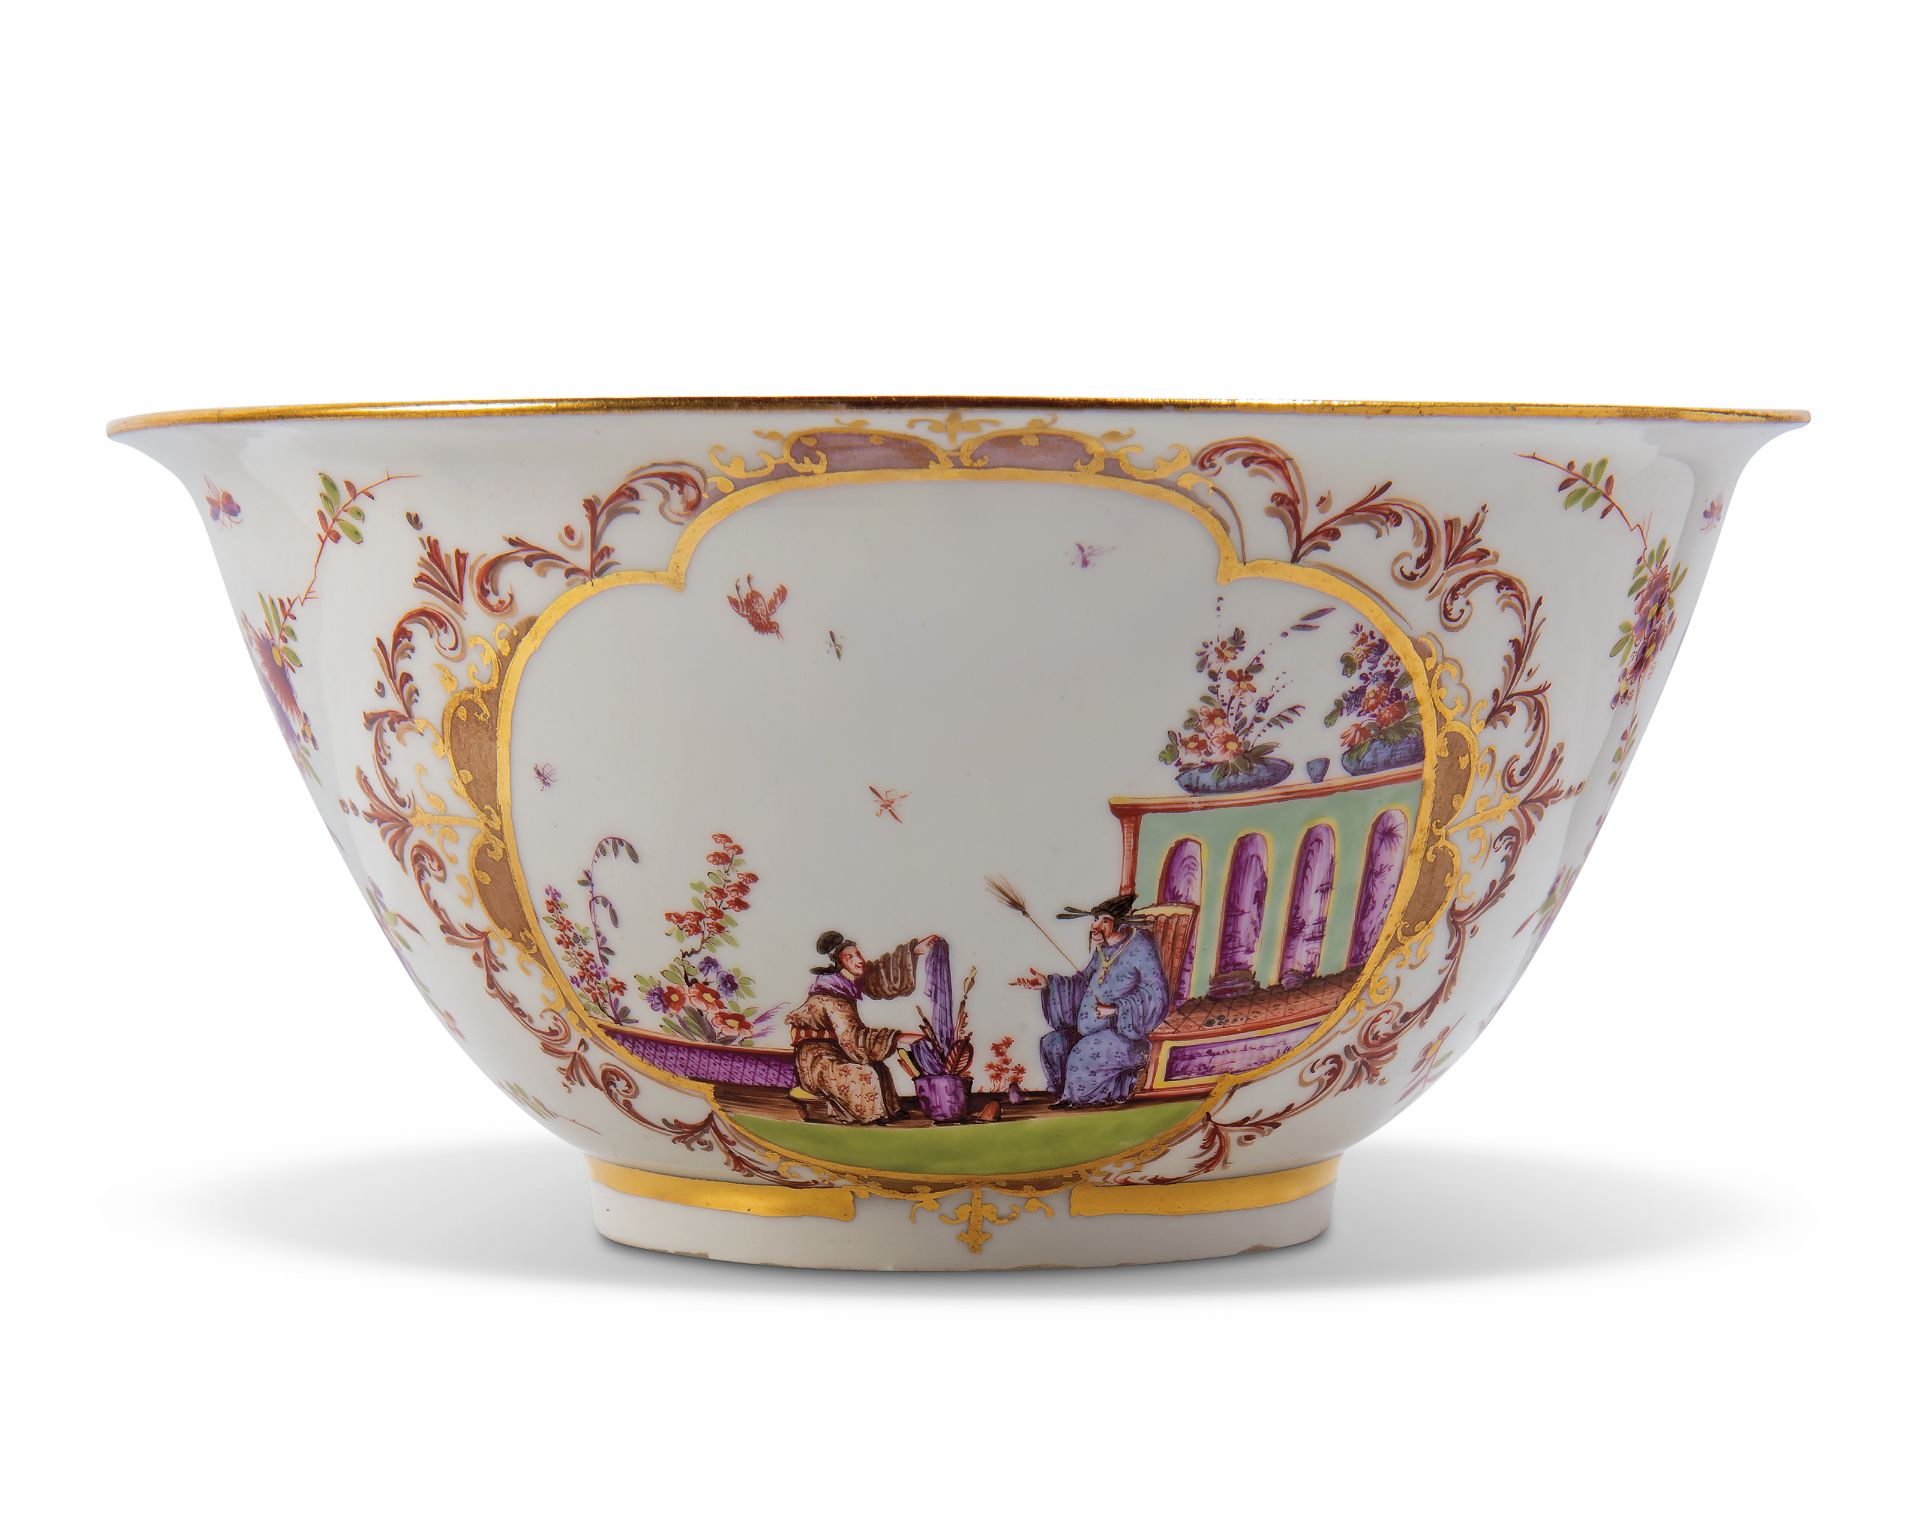 A Meissen porcelain chinoiserie waste-bowl, c.1724, gilders 93. mark, painted in the manner of J....